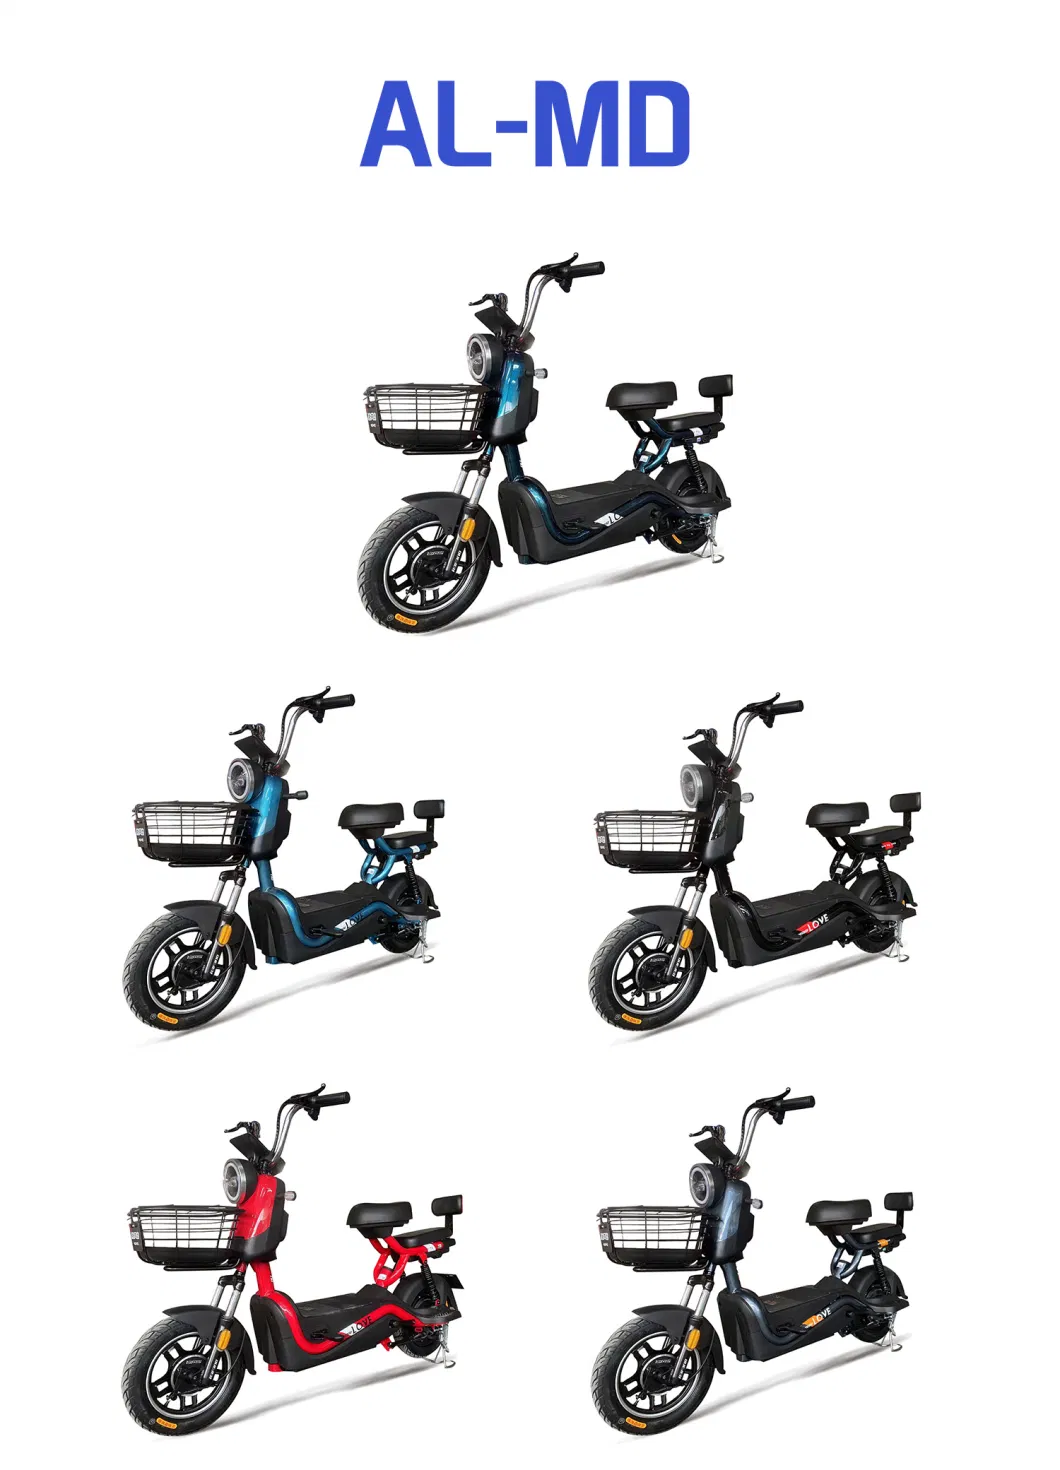 China Electric Bike Best Quality Electric Motorbike for Adult